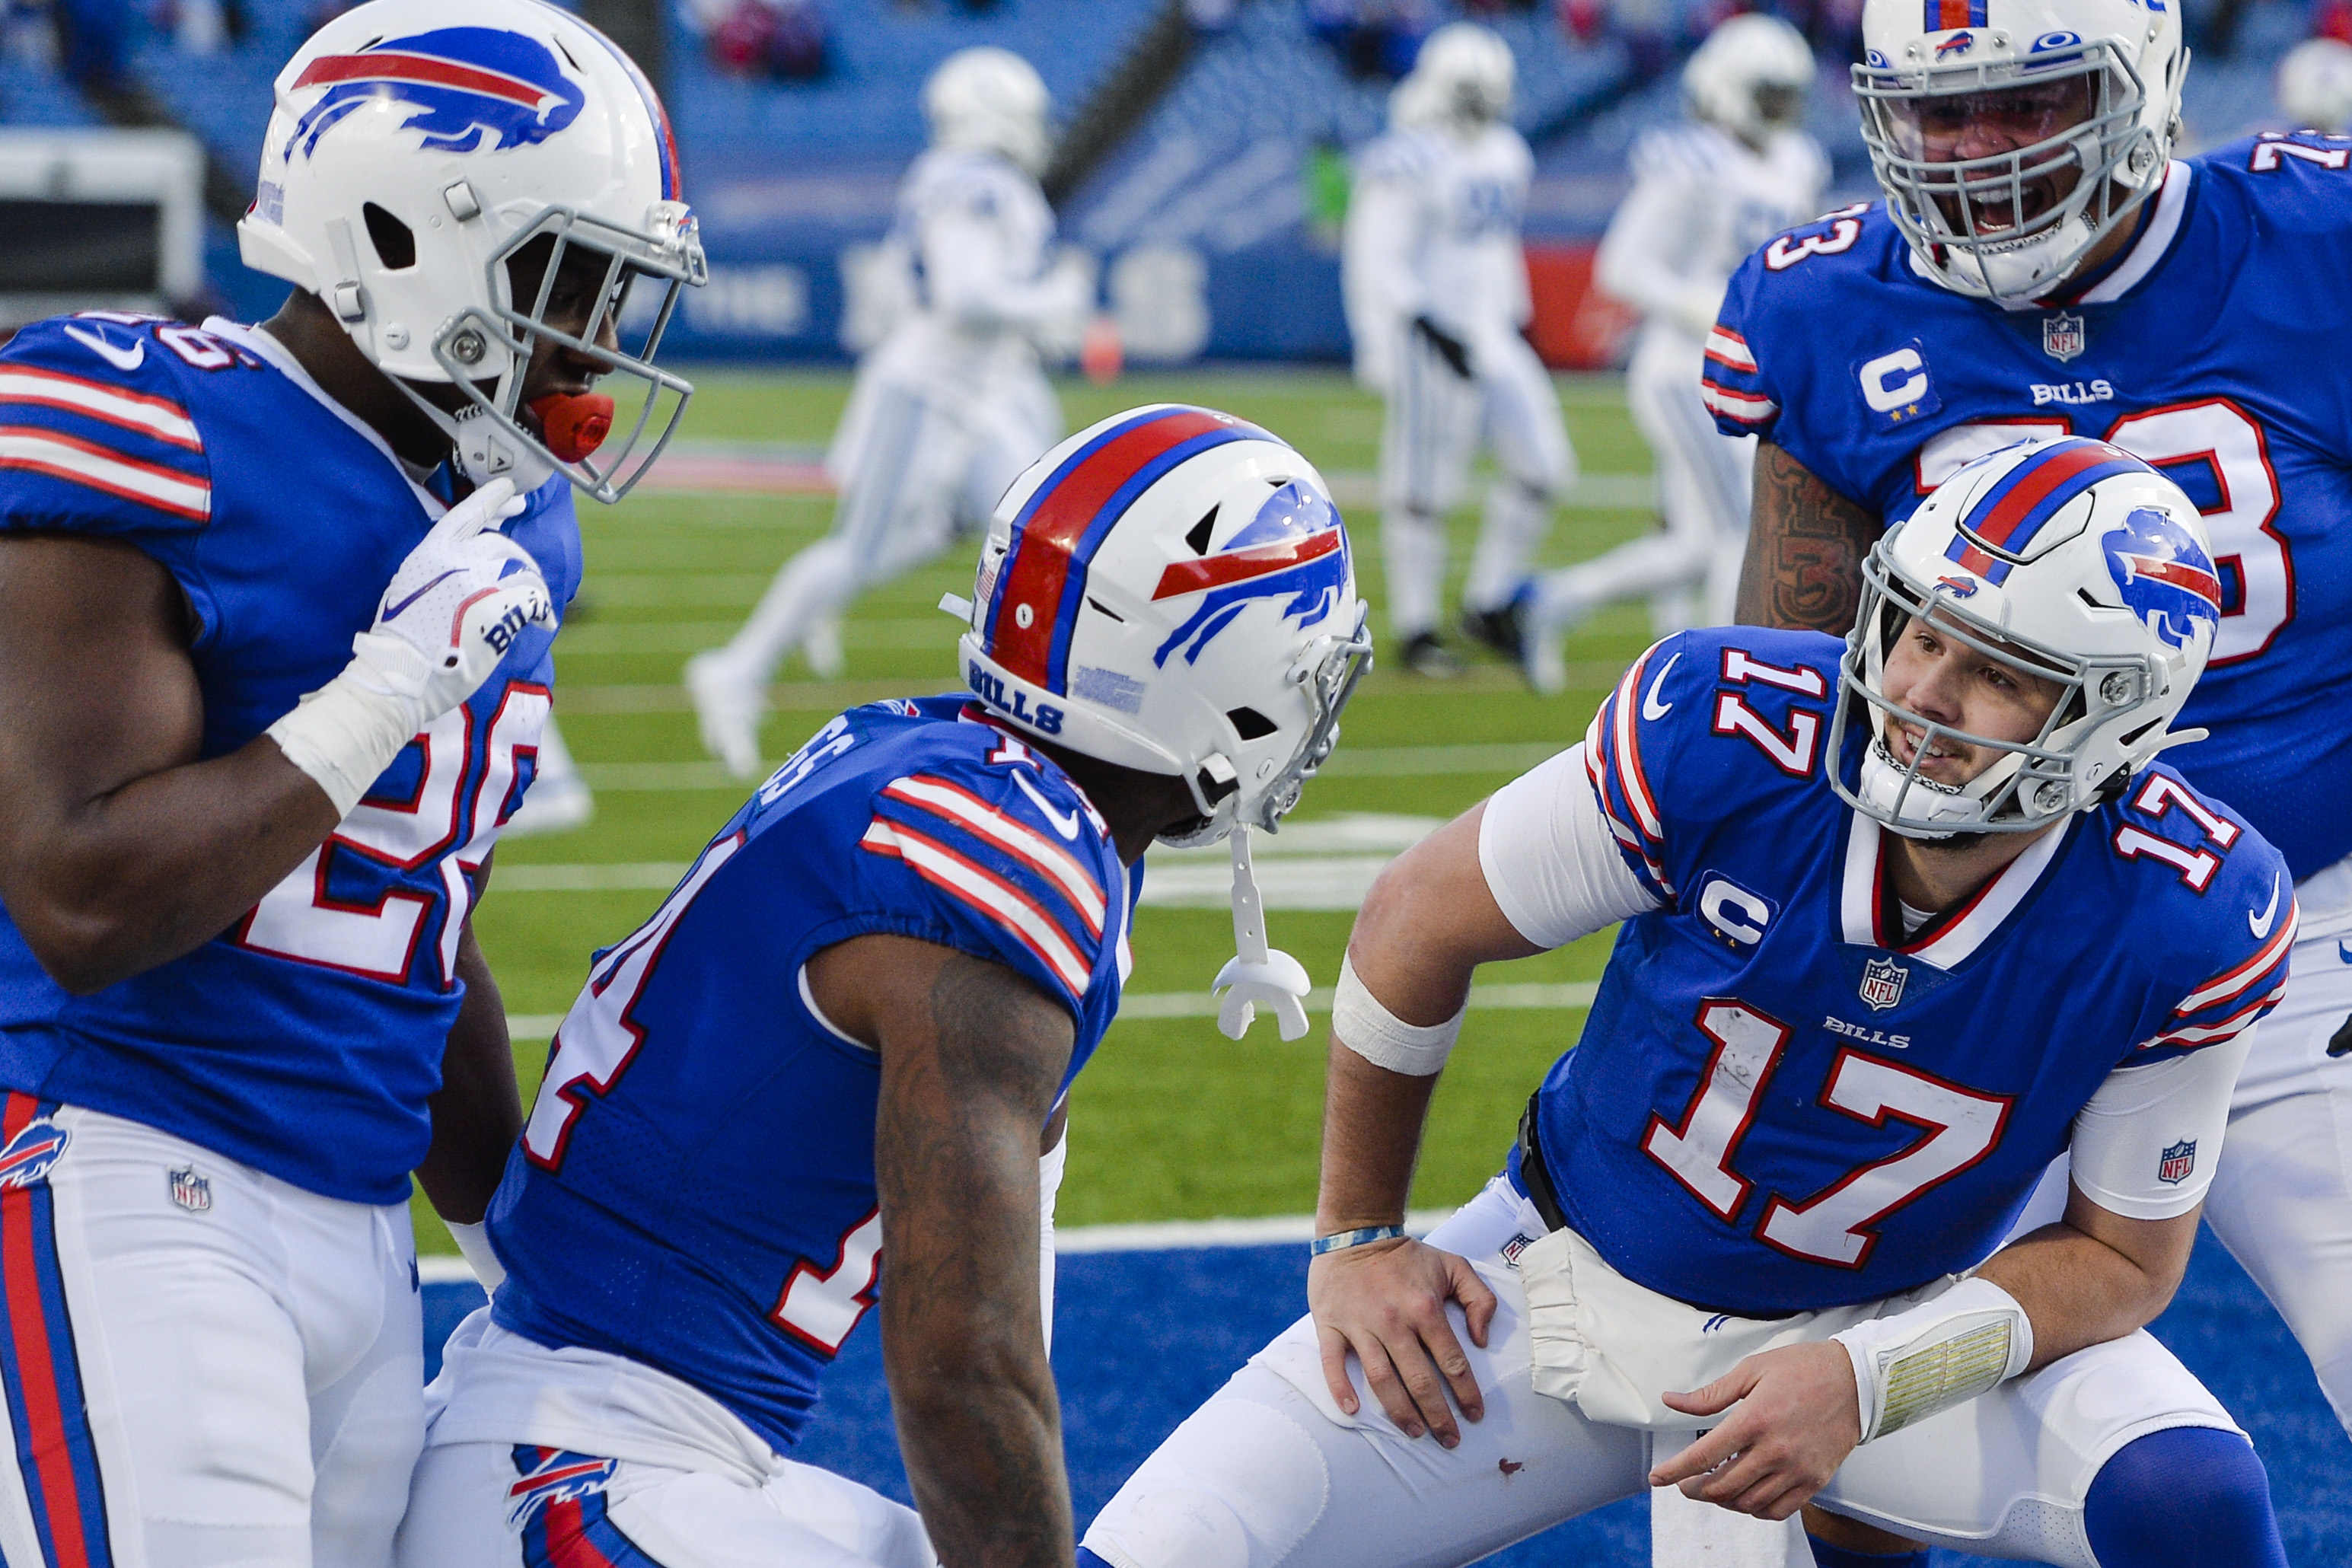 Bills vs. Panthers live stream: TV channel, how to watch